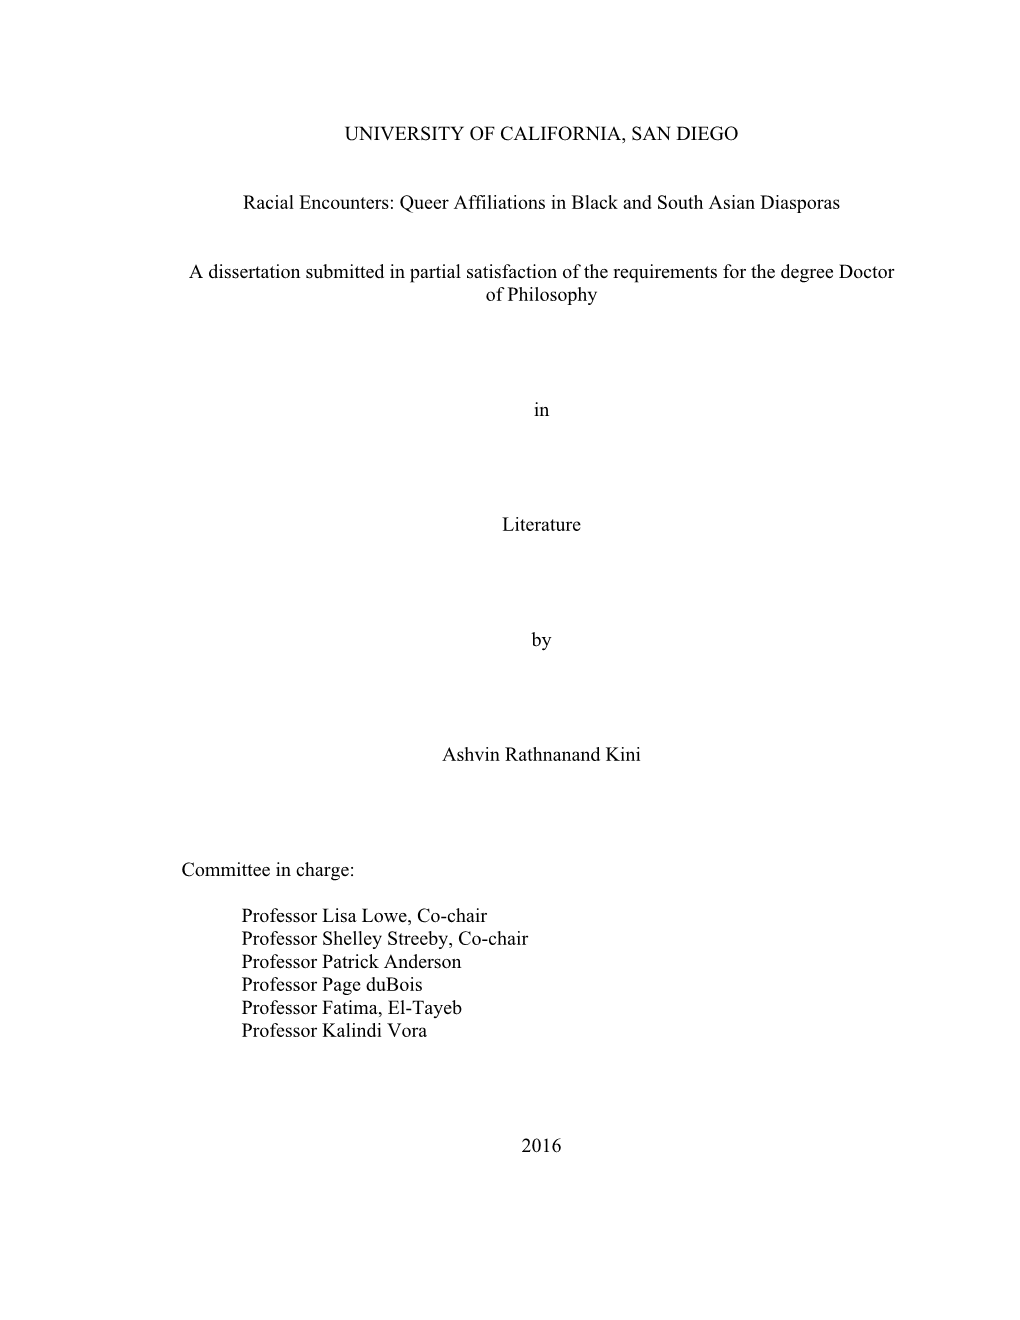 UNIVERSITY of CALIFORNIA, SAN DIEGO Racial Encounters: Queer Affiliations in Black and South Asian Diasporas a Dissertation Subm